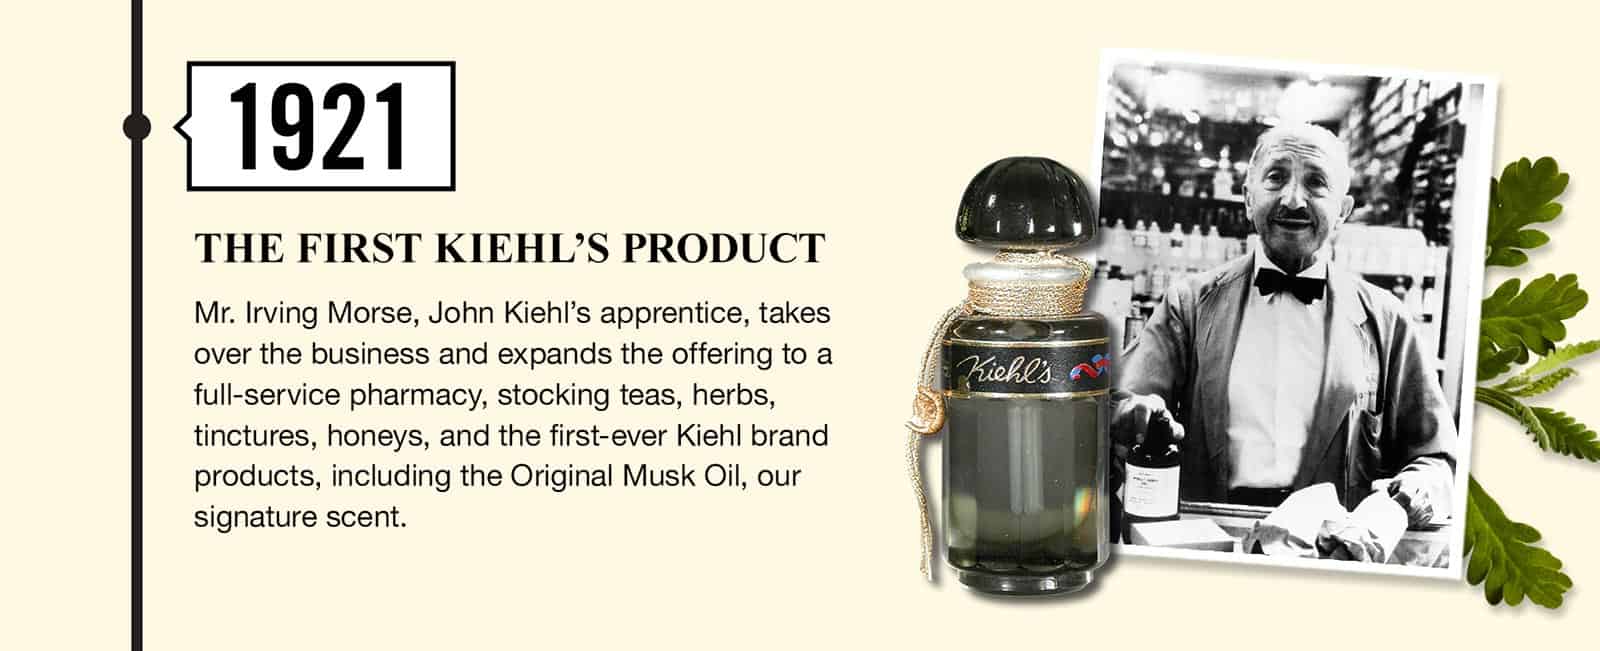 Kiehl's history in the year 1921